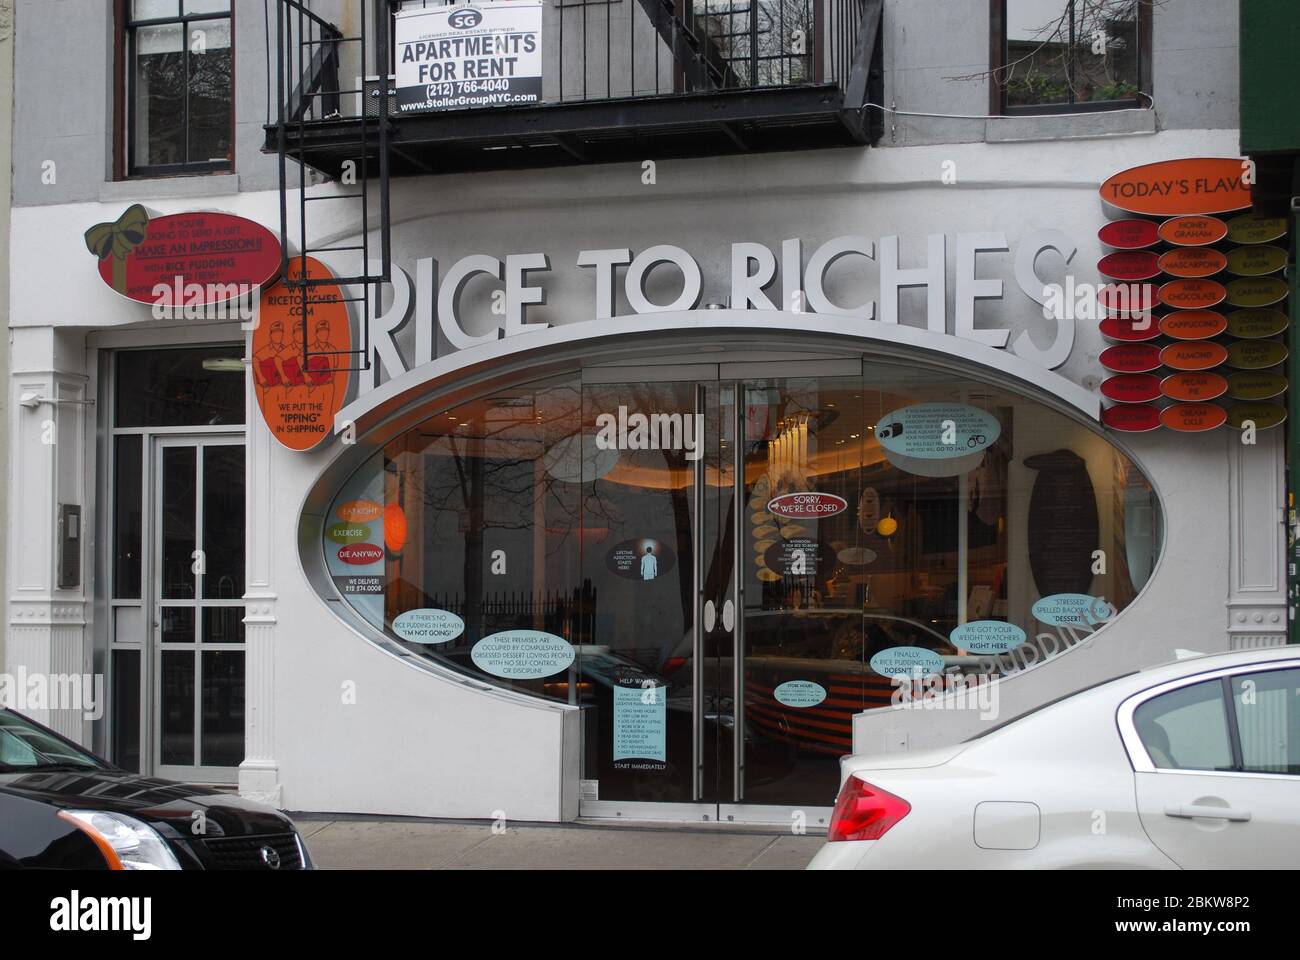 Rice to Riches, 37 Spring St, New York, NY 10012, United States Stock Photo